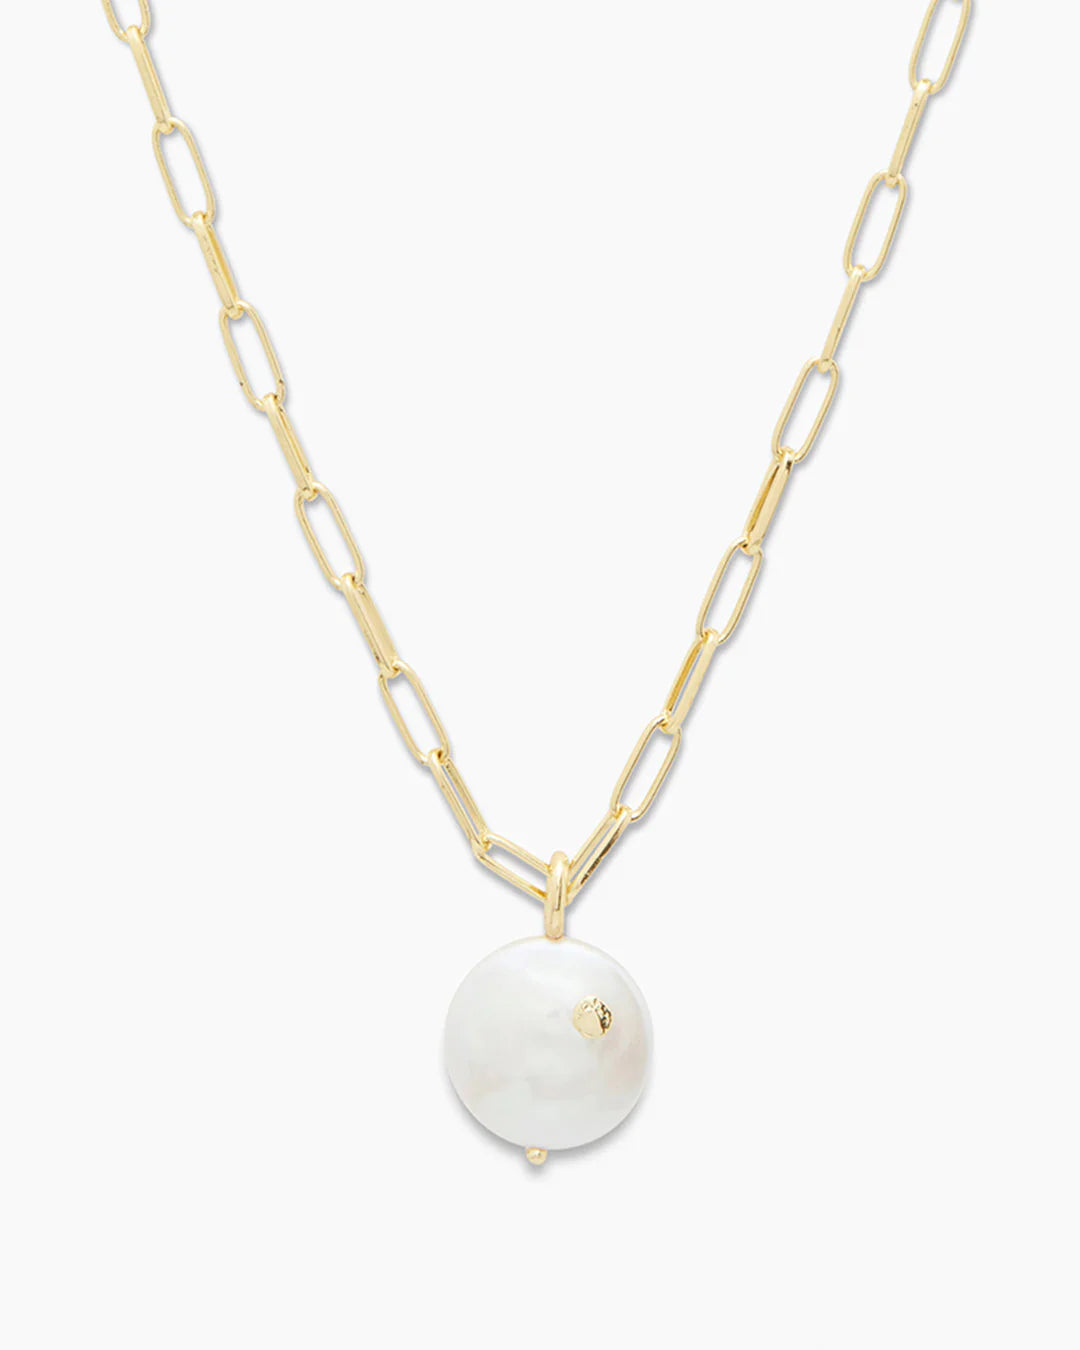 Gorjana Reese Pearl Charm Necklace